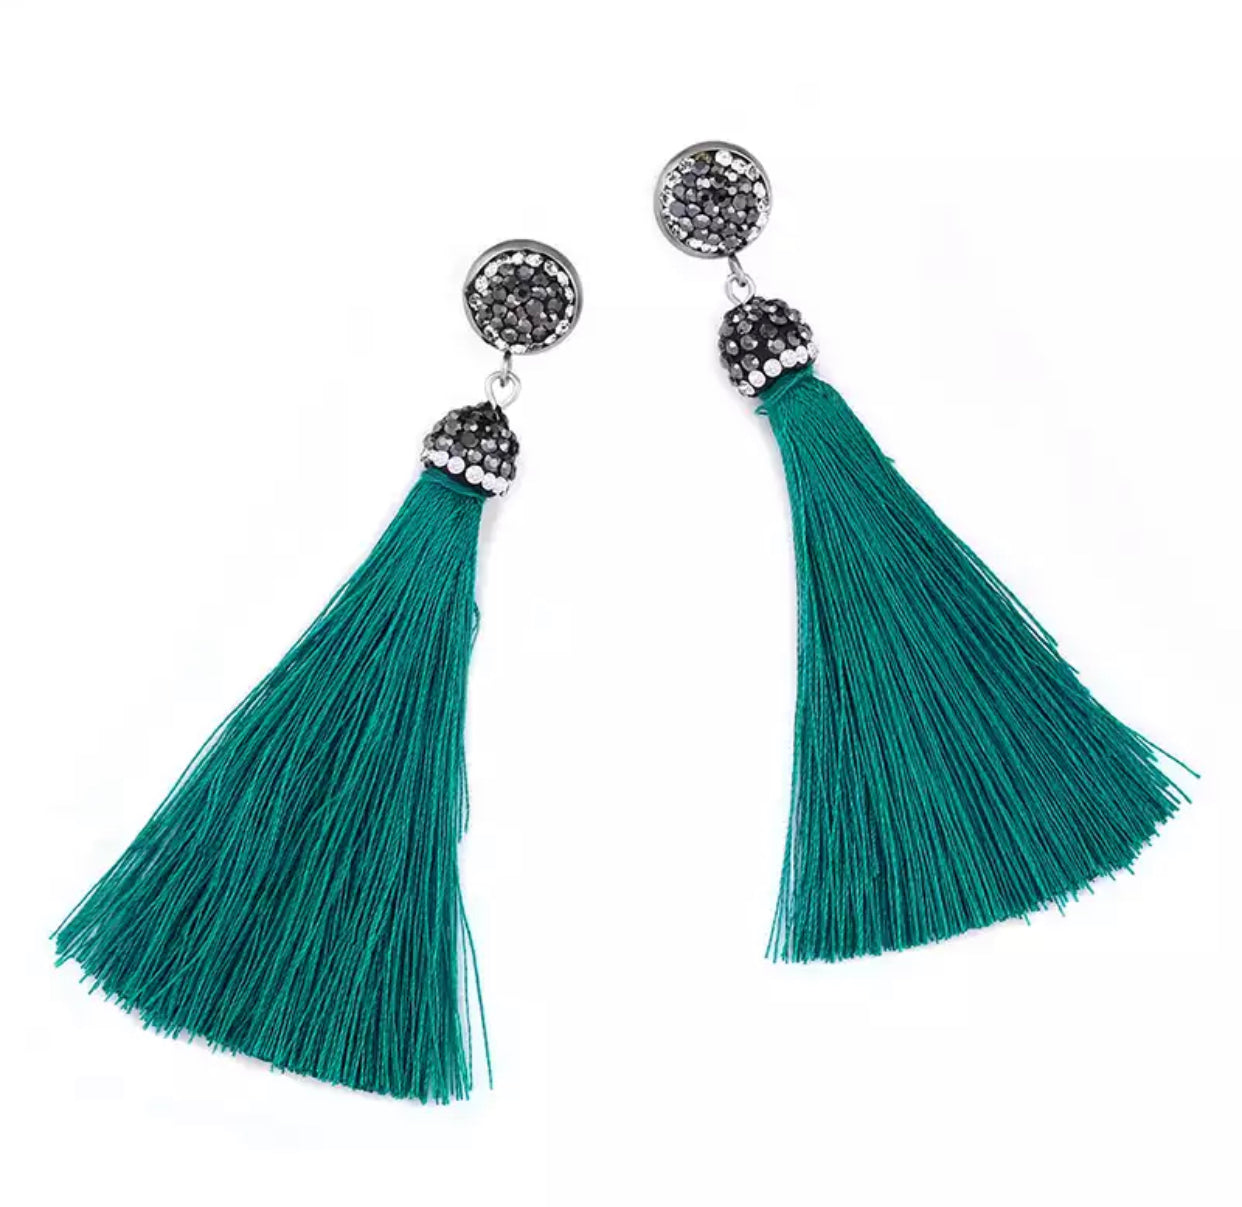  Pave embellished post earrings with green silk tassel